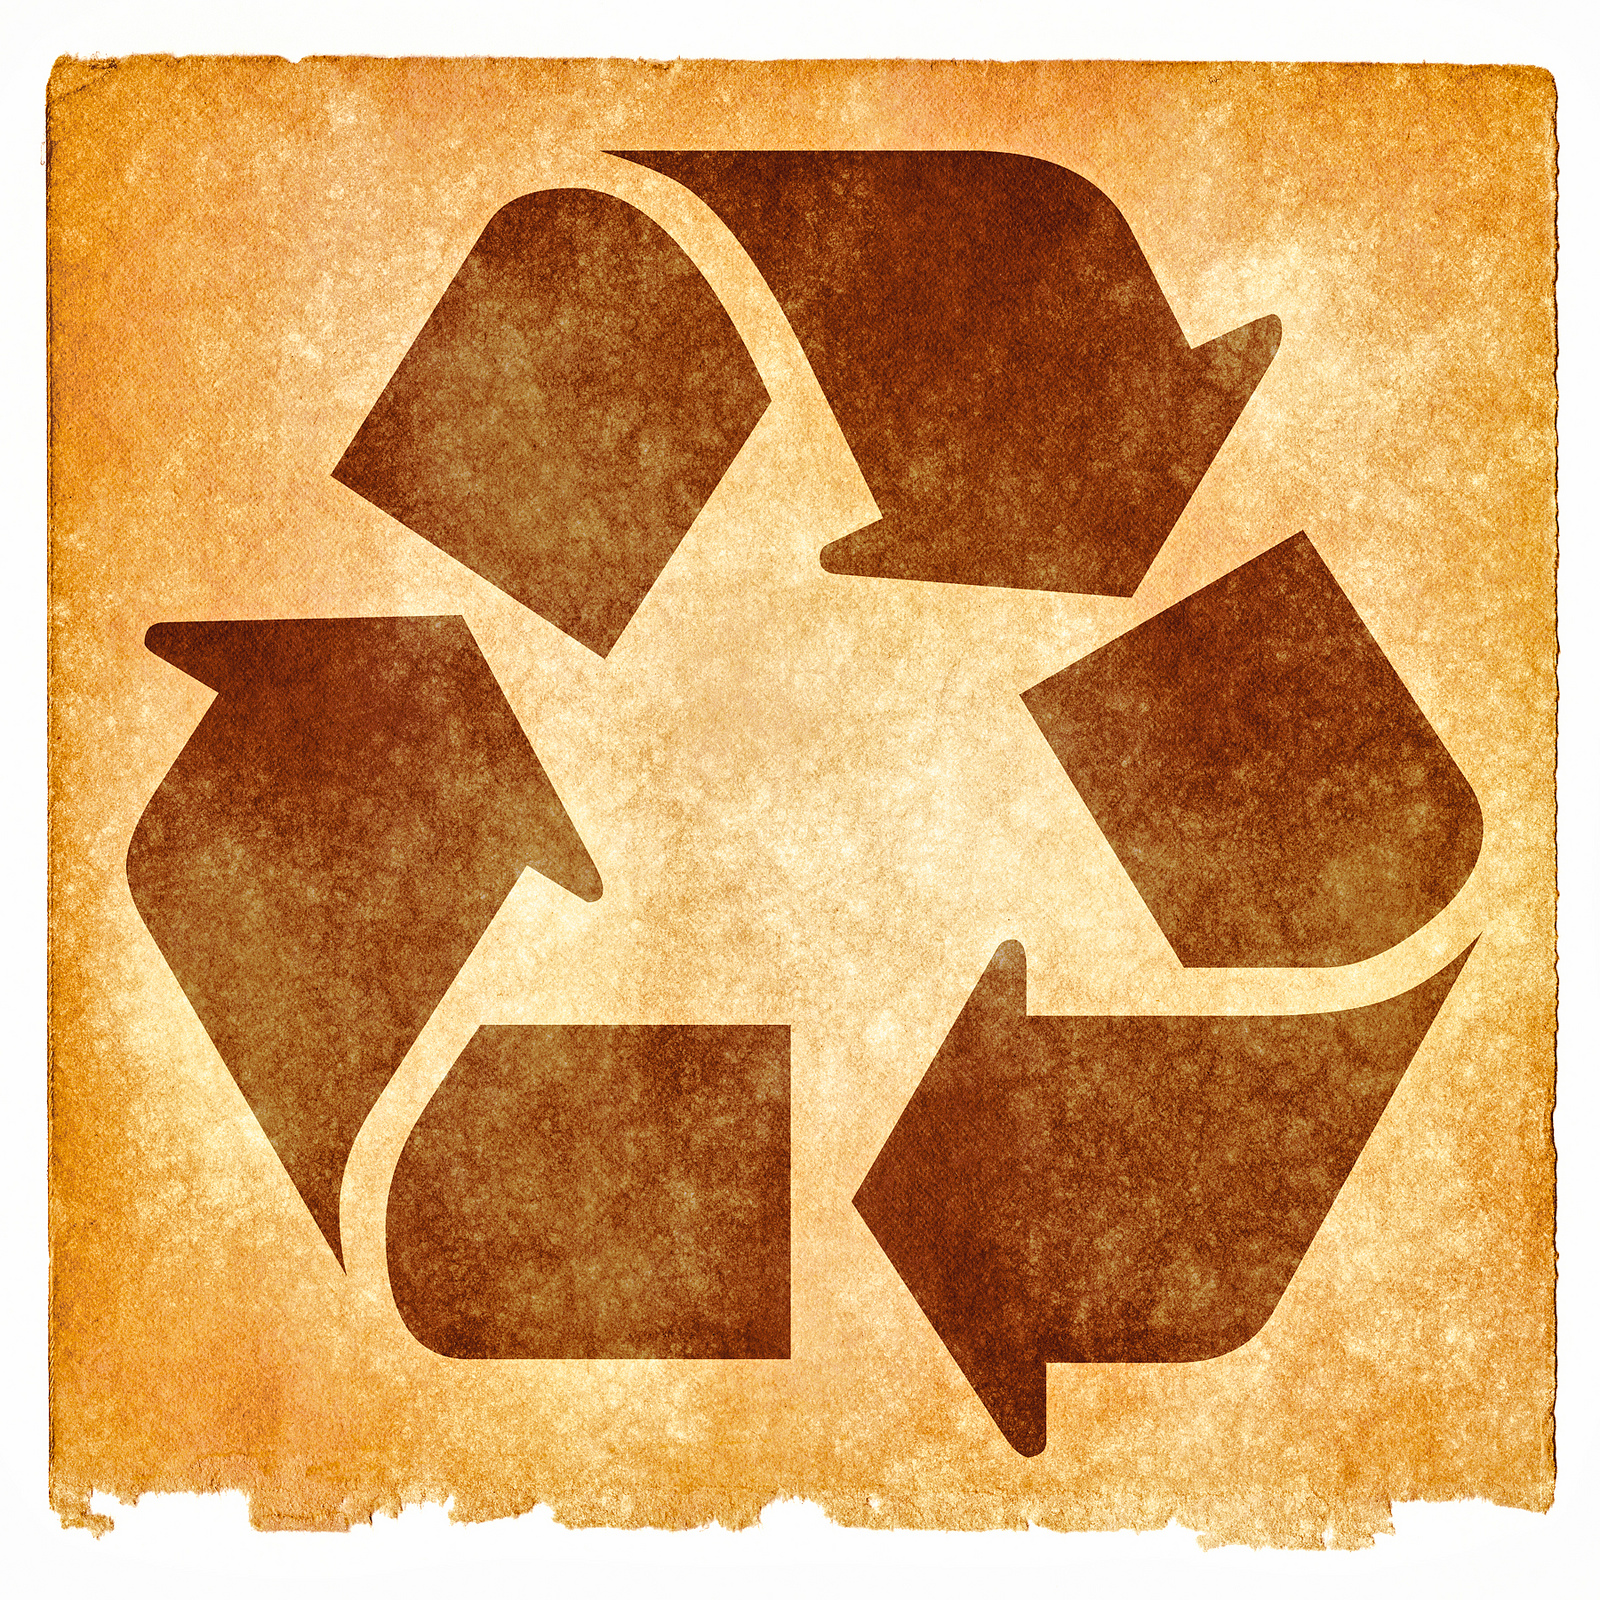 A brown recycling symbol on a sepia background.